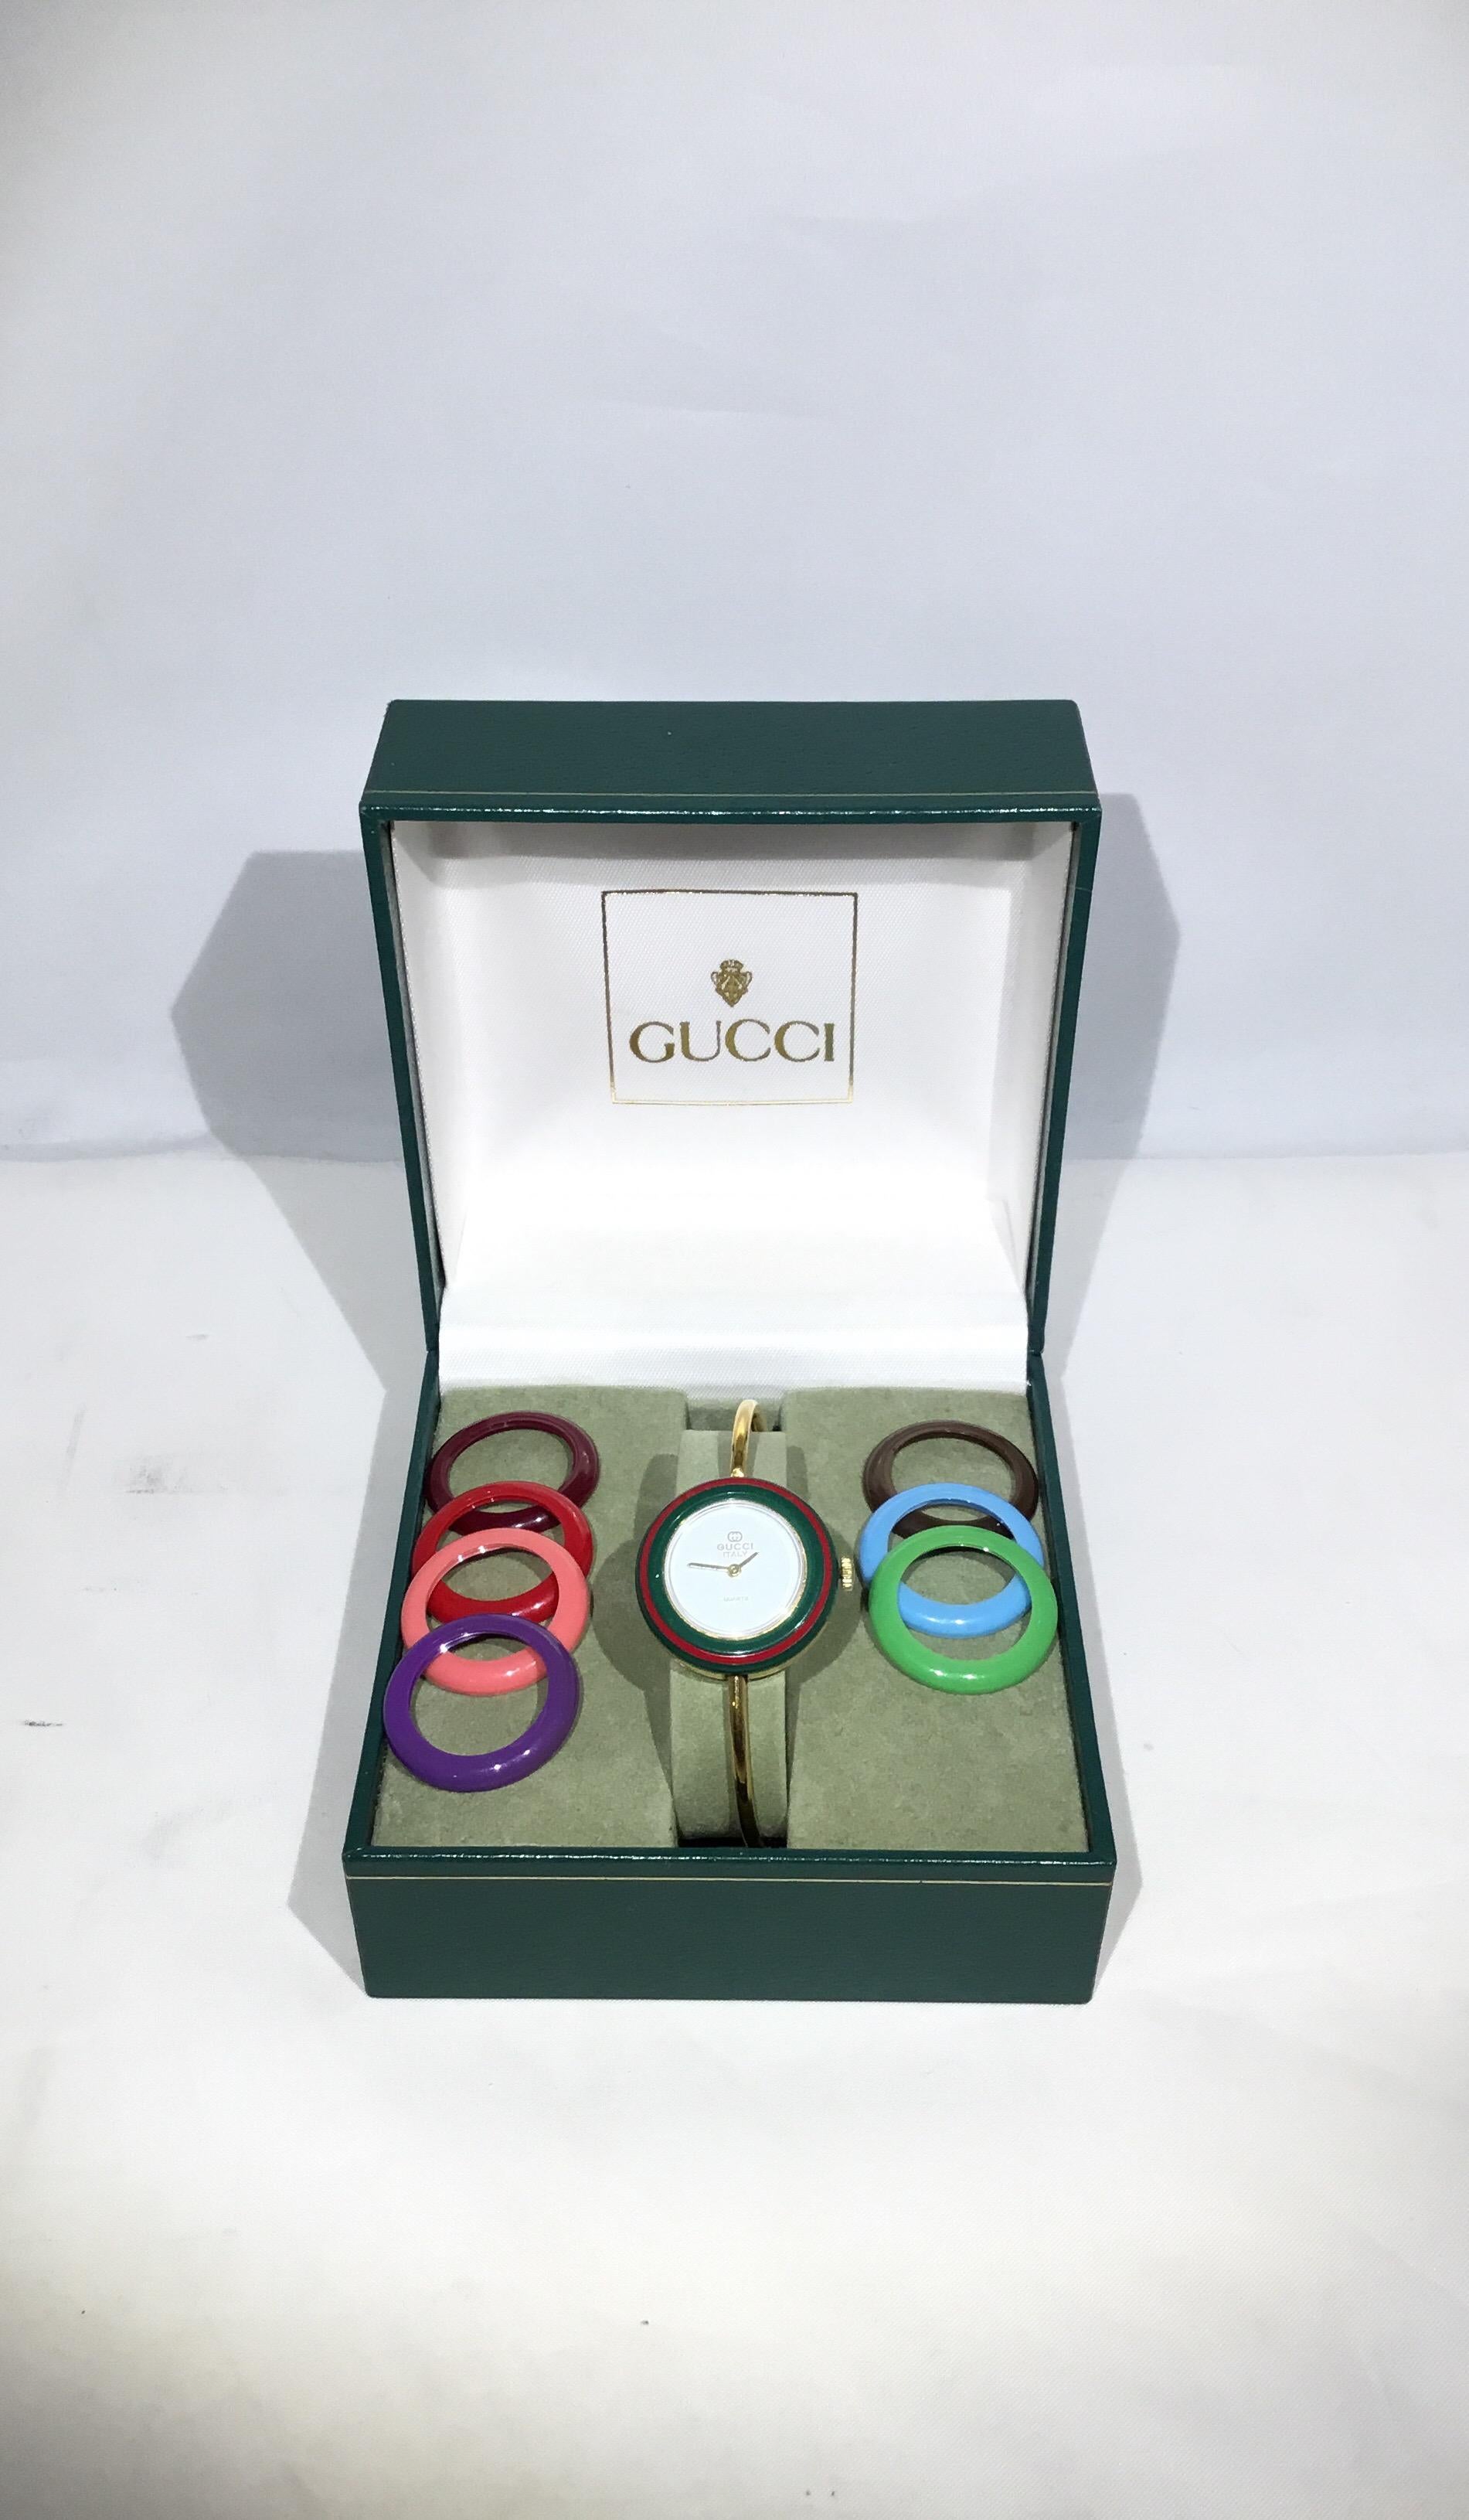 Vintage Gucci watch features a gold tone metal band with 8 interchangeable bezels. Battery needs replacement. Excellent condition.

6.5 circumference. 2.25” opening